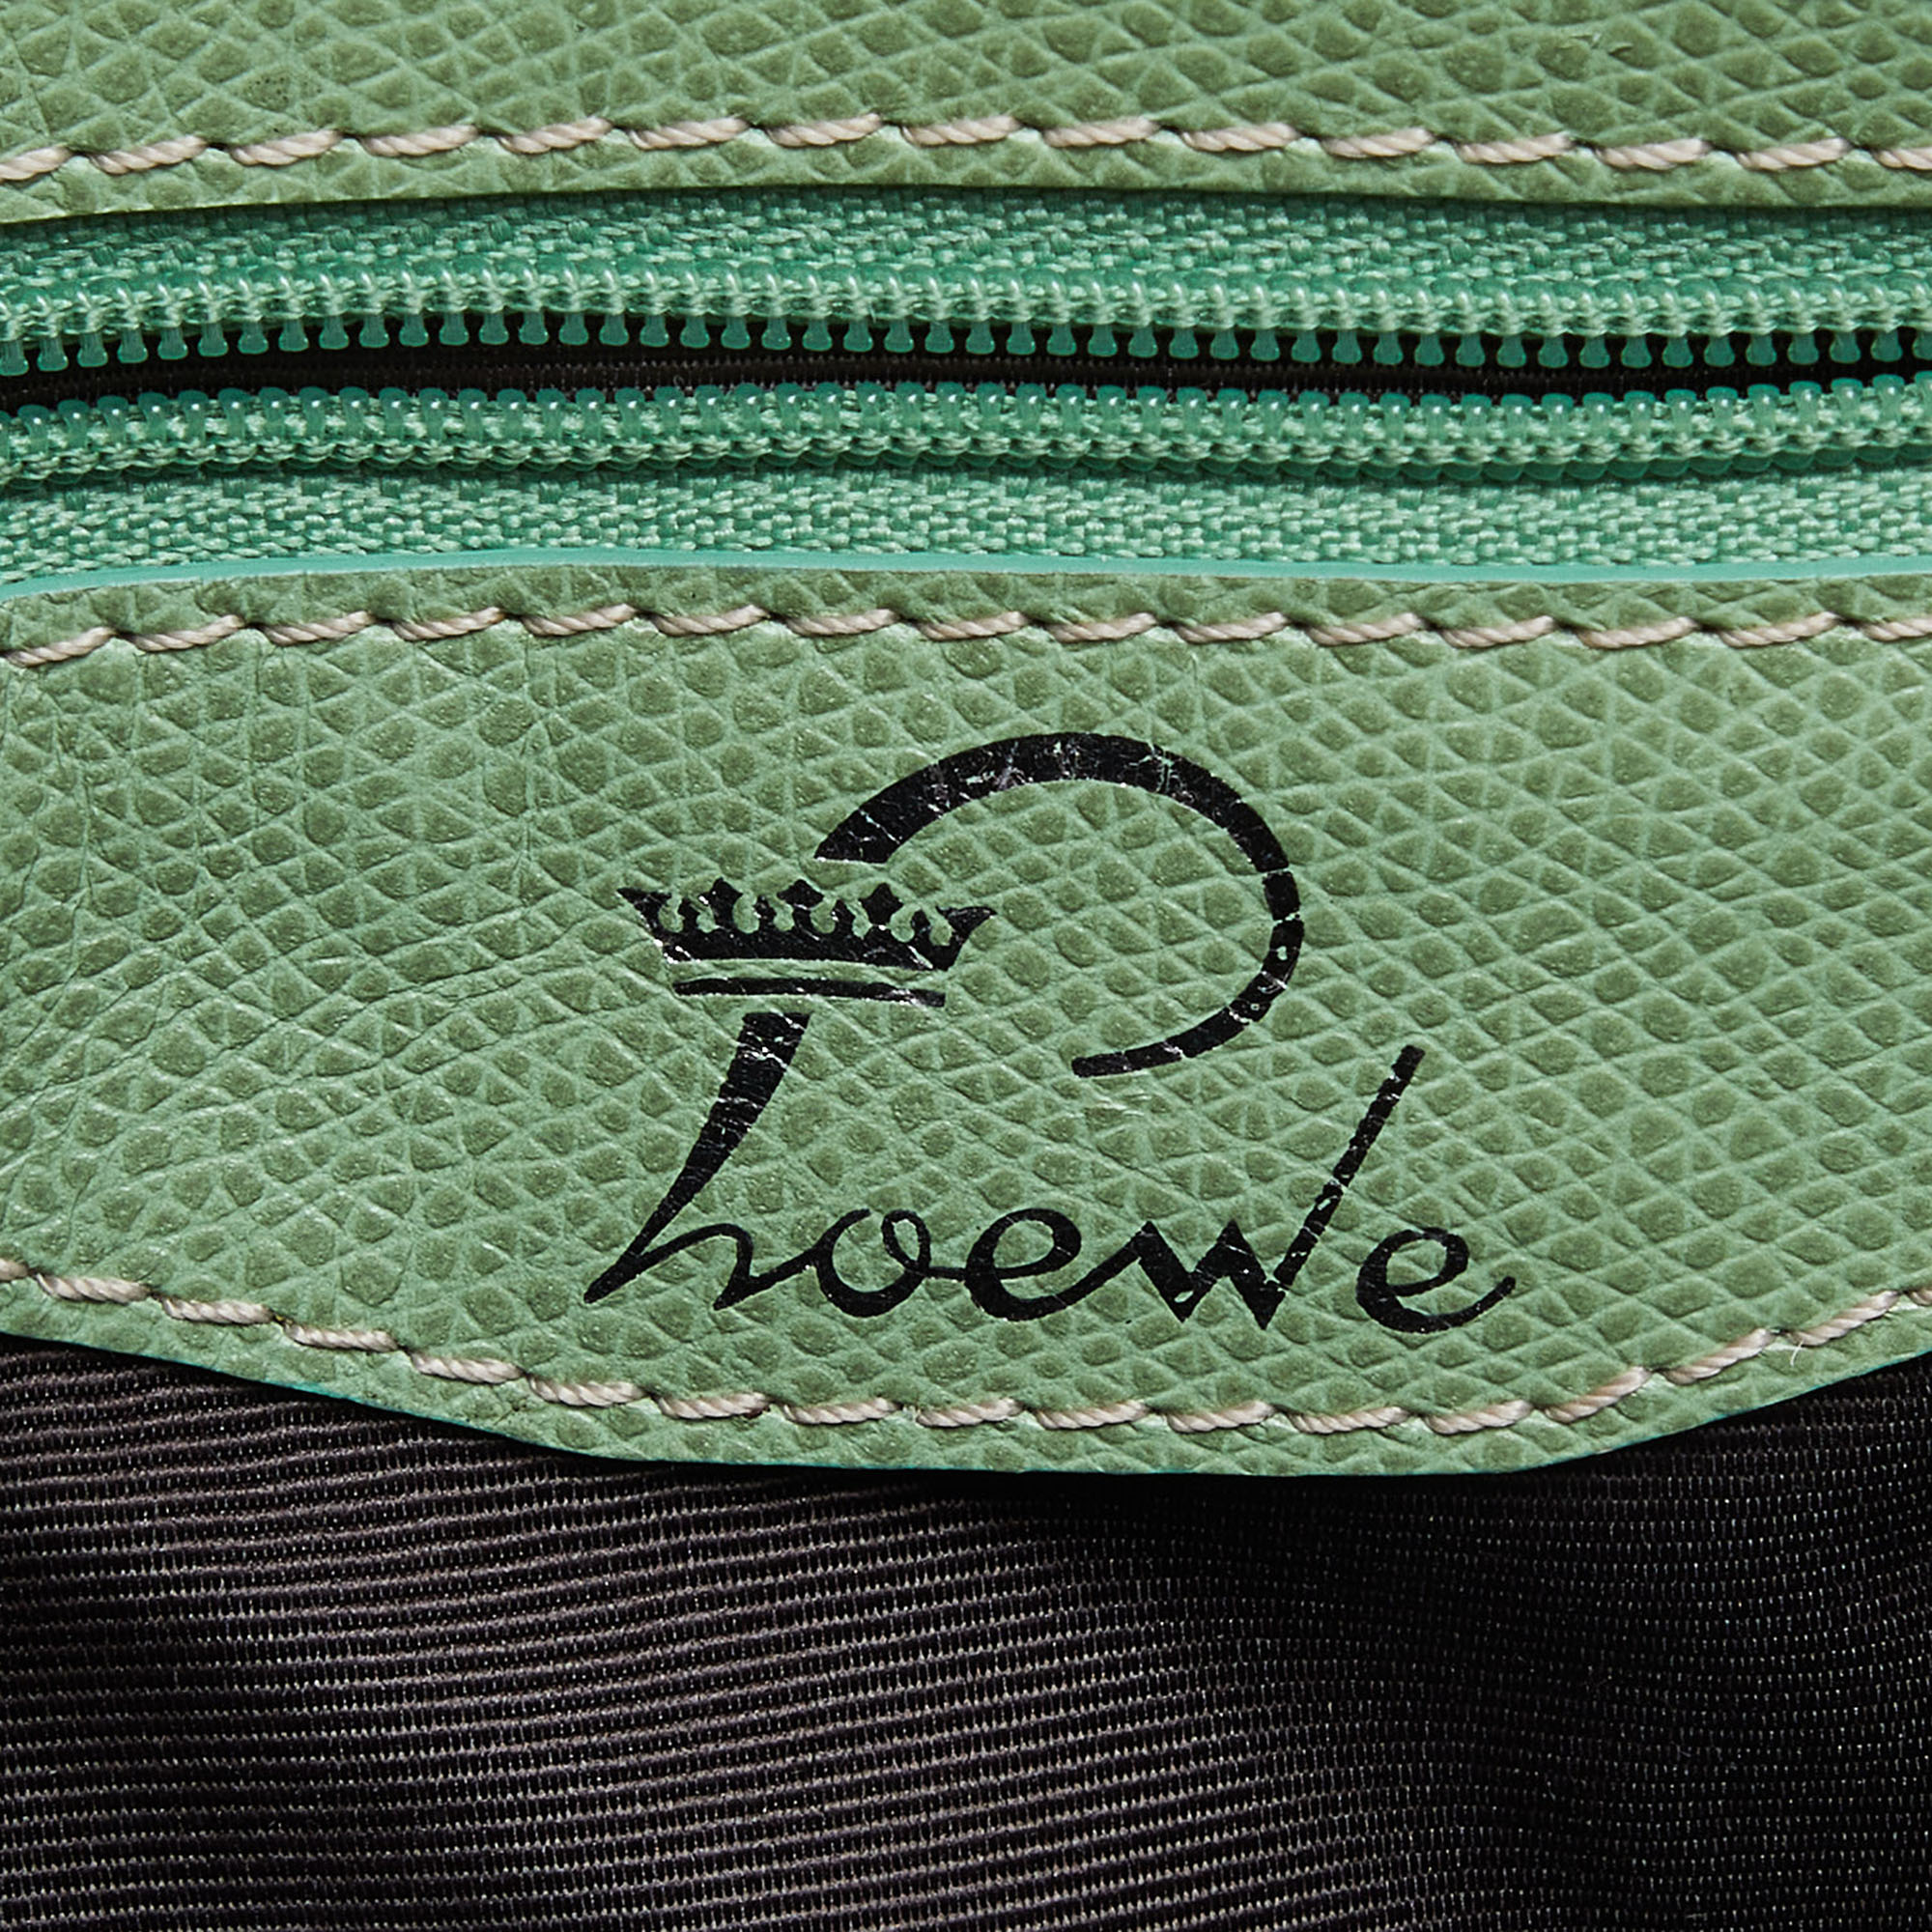 Loewe Green Signature Canvas And Leather Small Bowling Bag